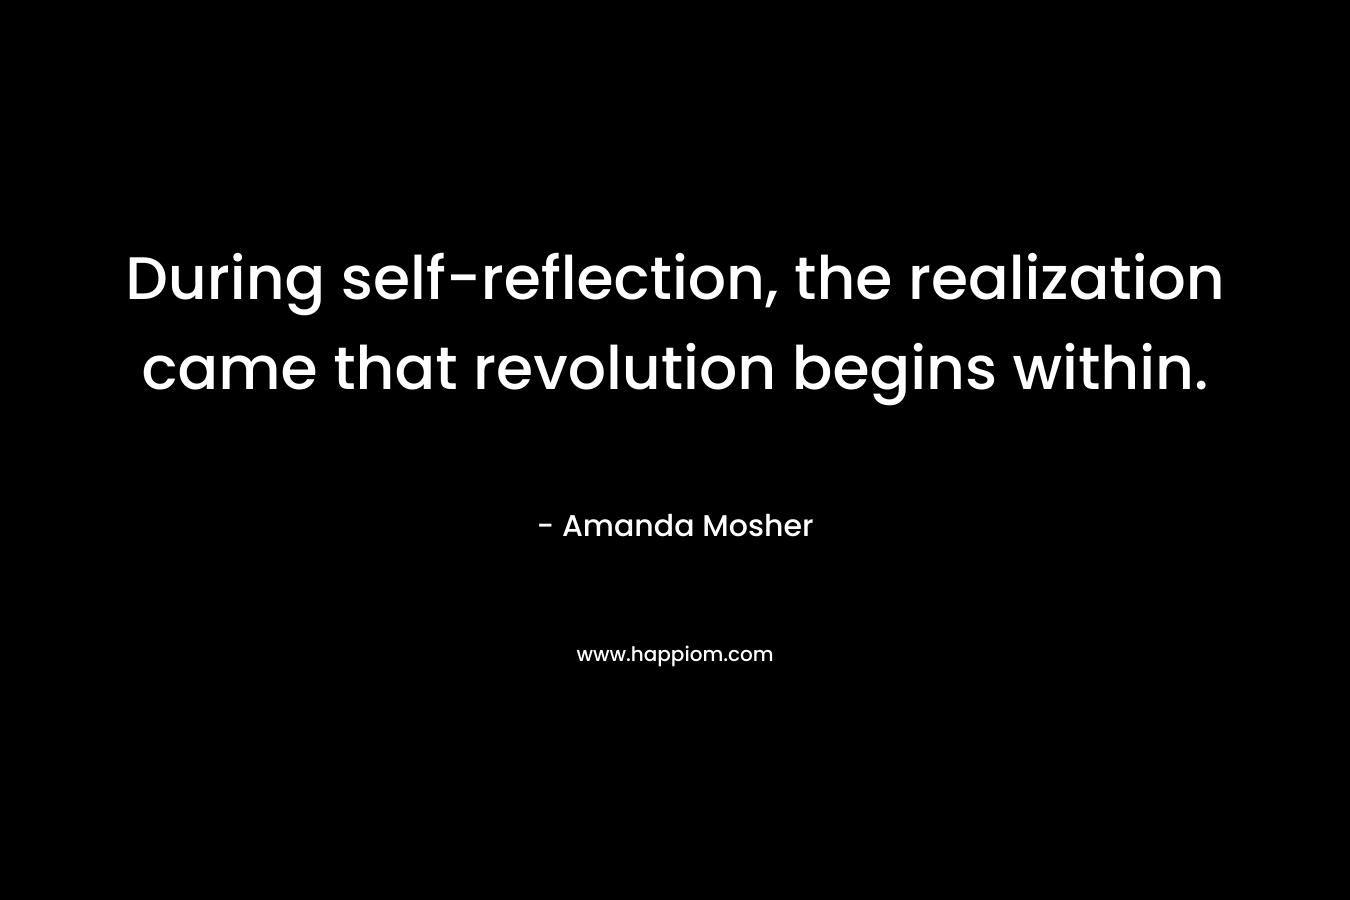 During self-reflection, the realization came that revolution begins within. – Amanda Mosher